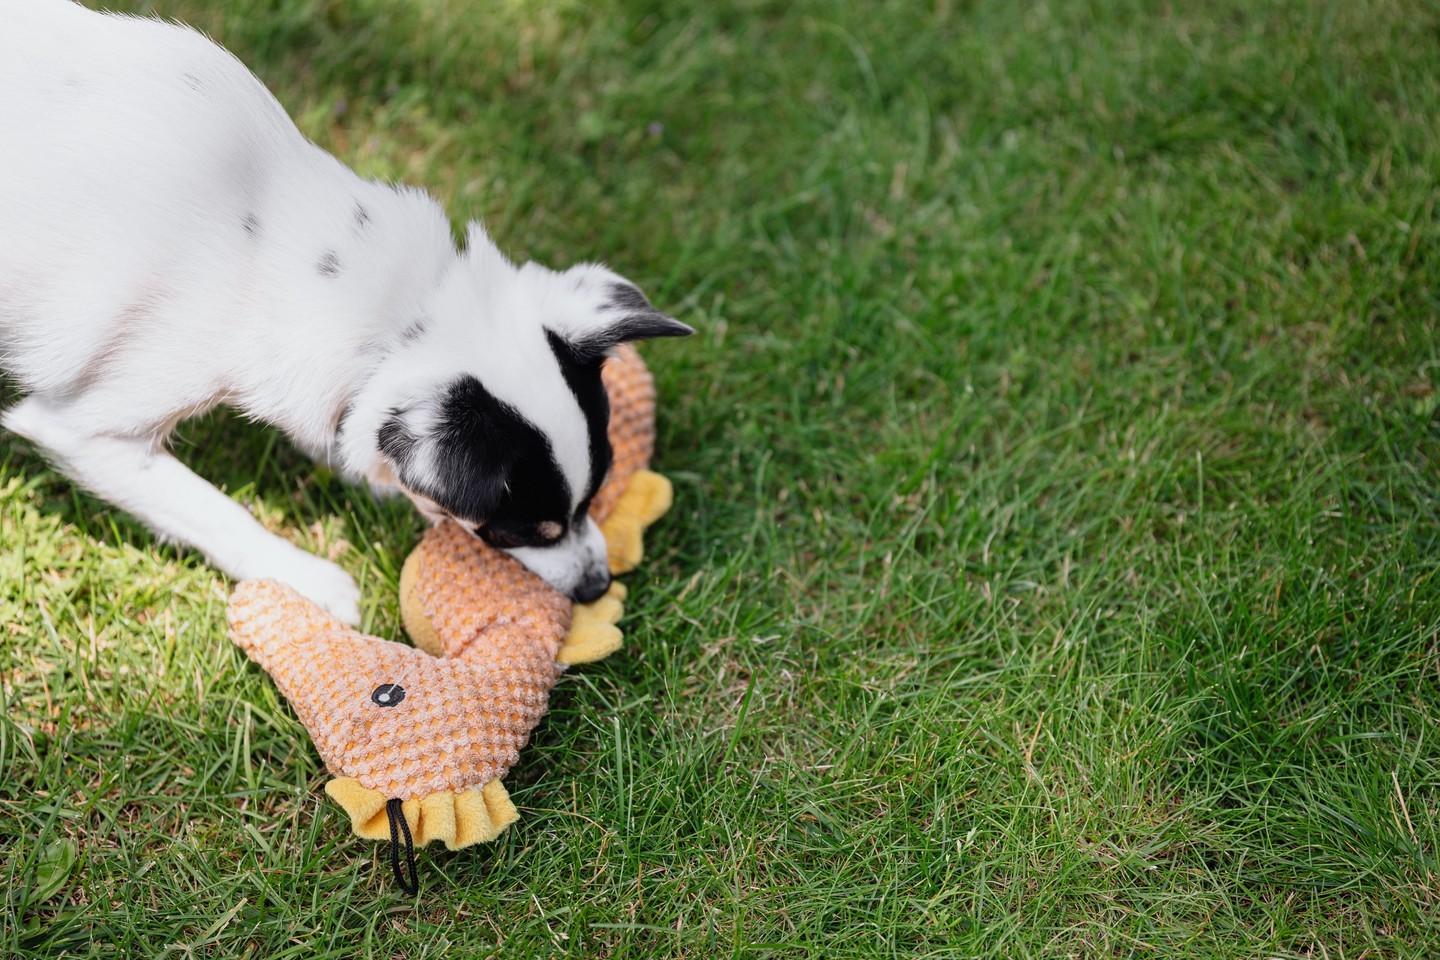 Enriching your dog with plenty of activities is a must, or they'll explore yo...